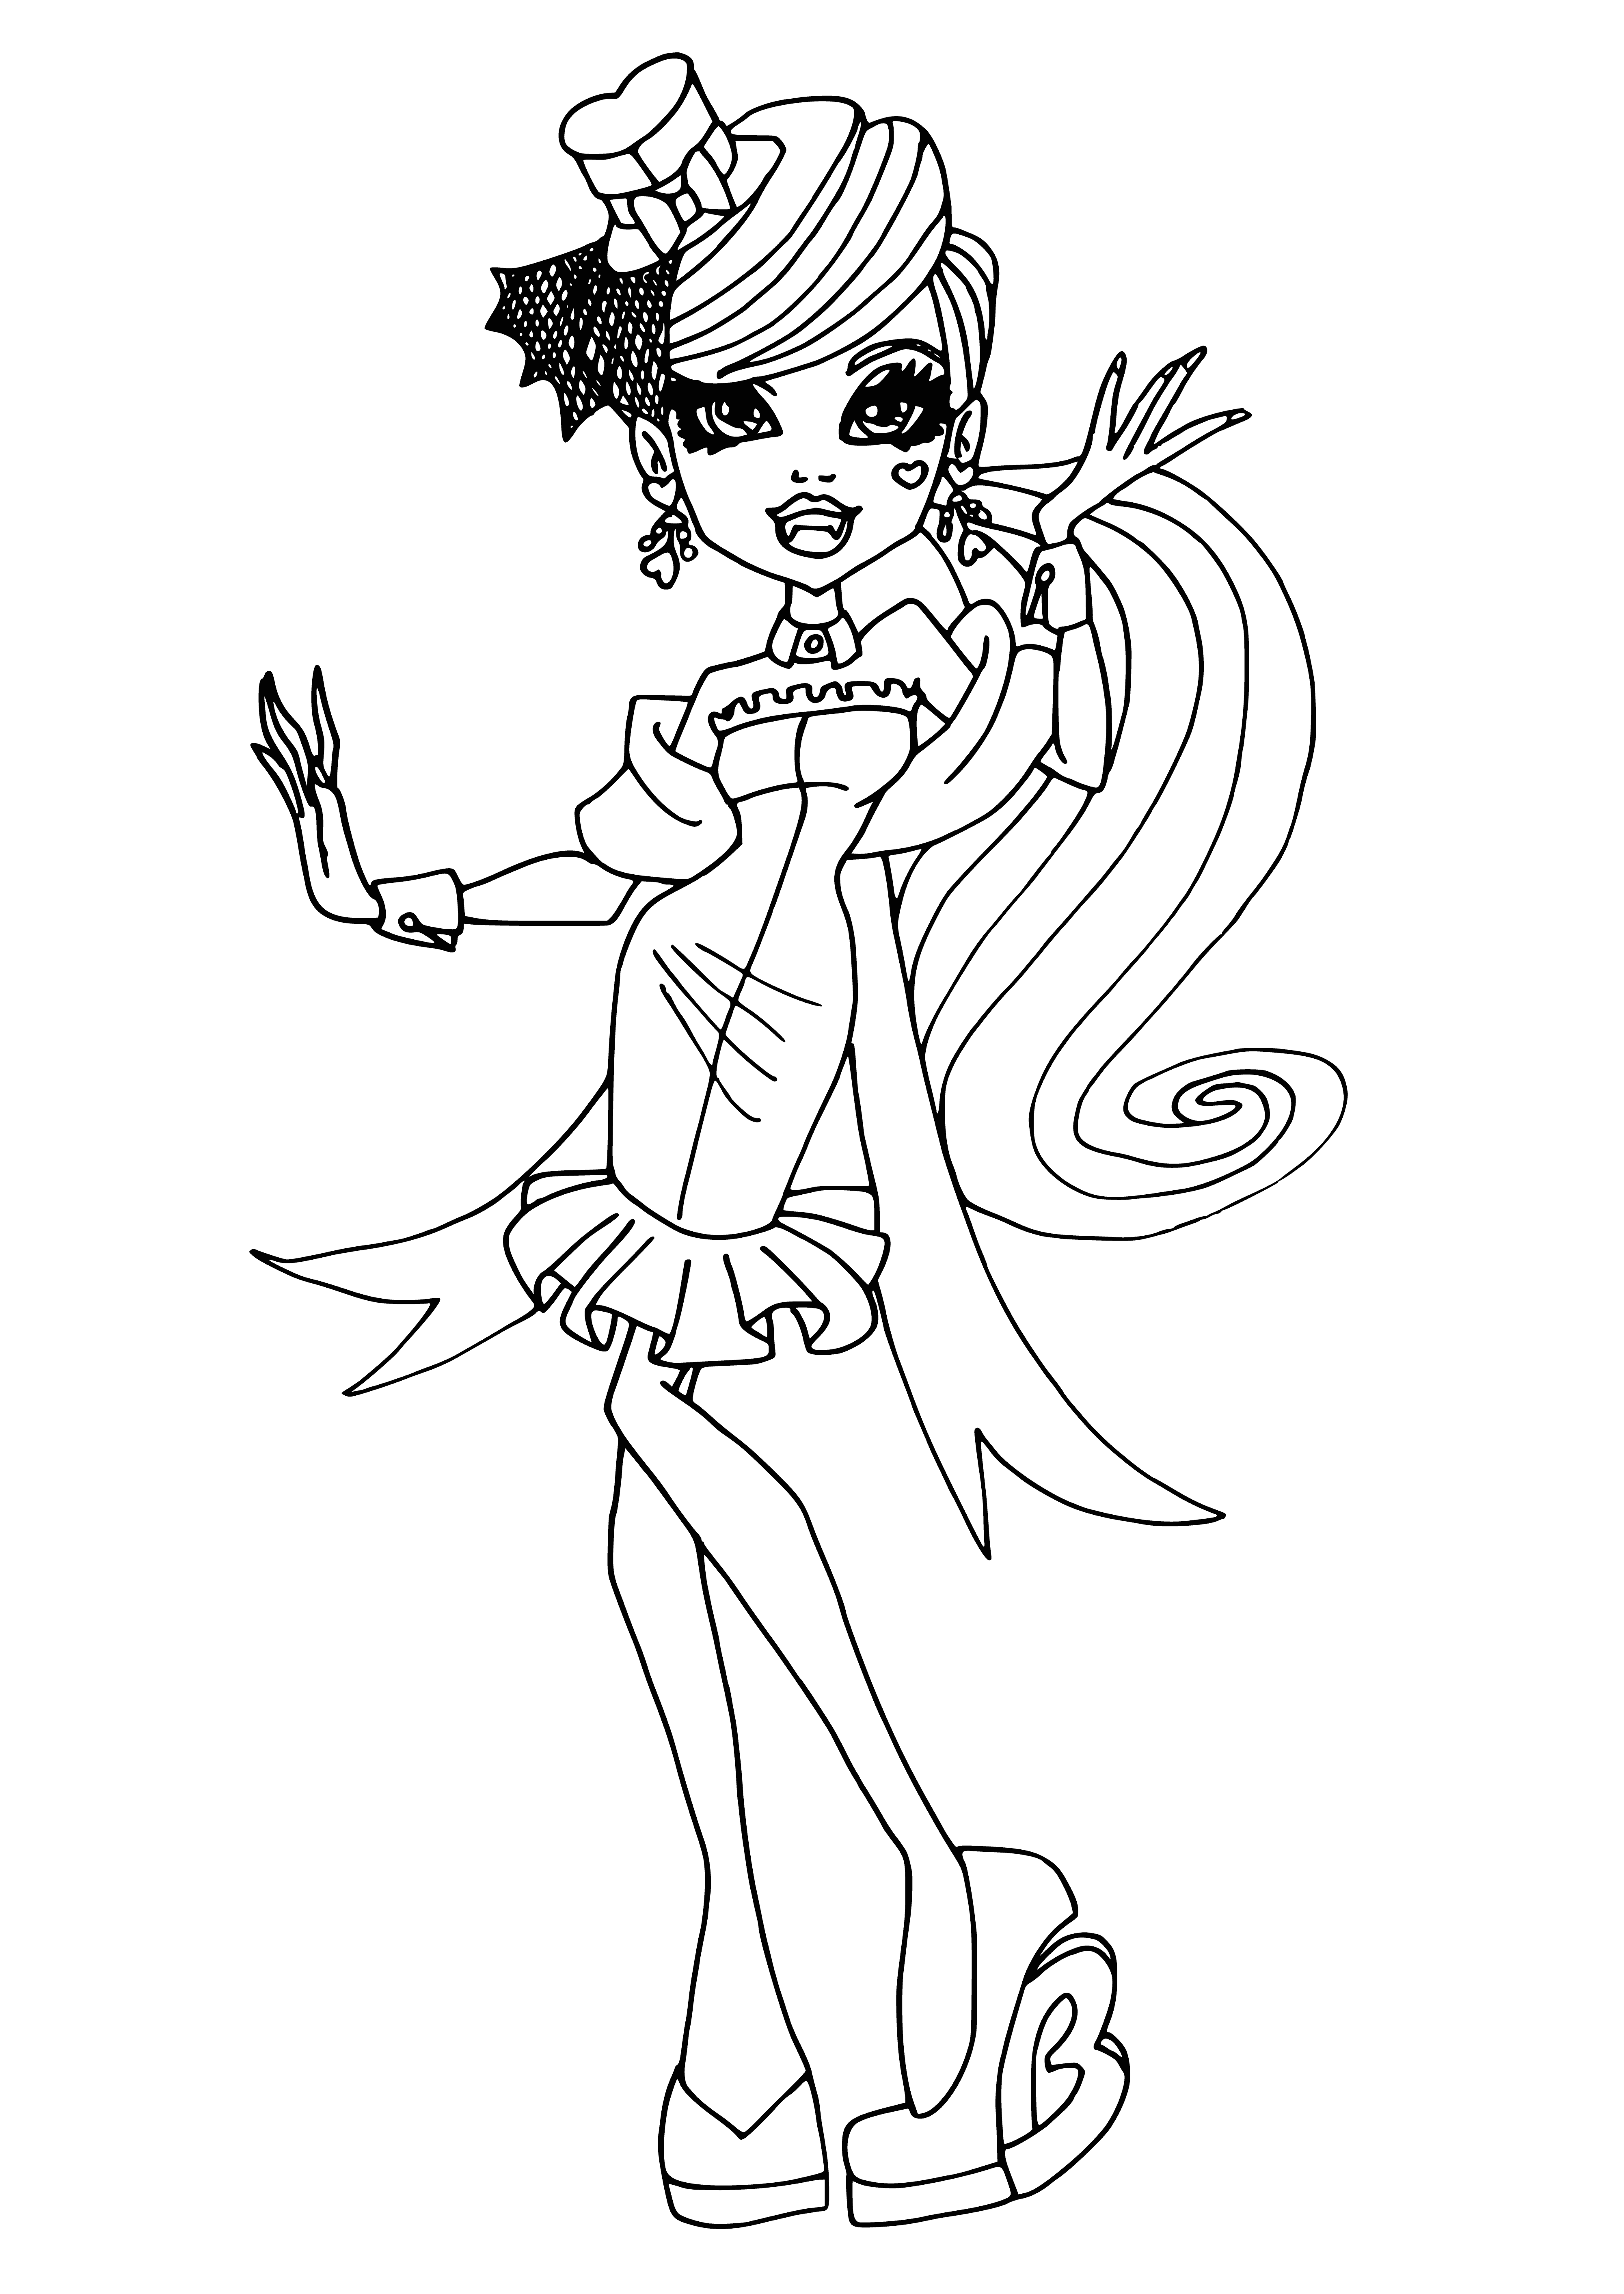 coloring page: She's a punk rocker with long black hair & a pink streak, green eyes, pale skin, & a pink & black striped shirt and boots.